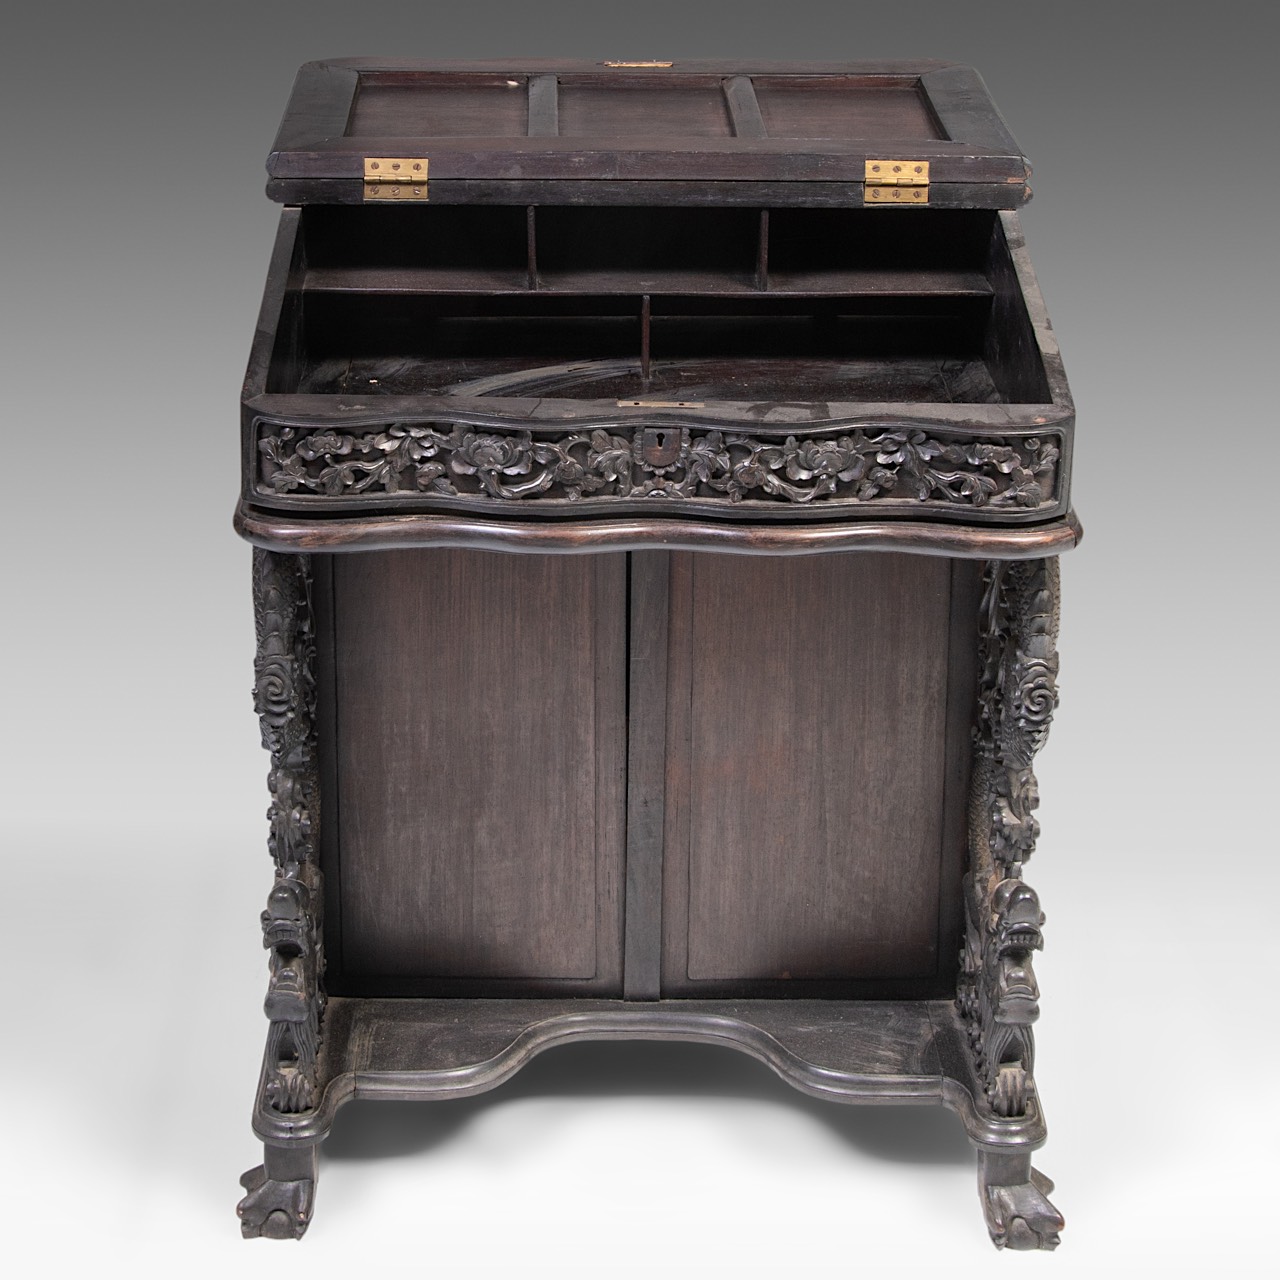 A compact South Chinese carved hardwood writing desk, 19thC, H 83 - W 66 - D 62 cm - Image 7 of 10